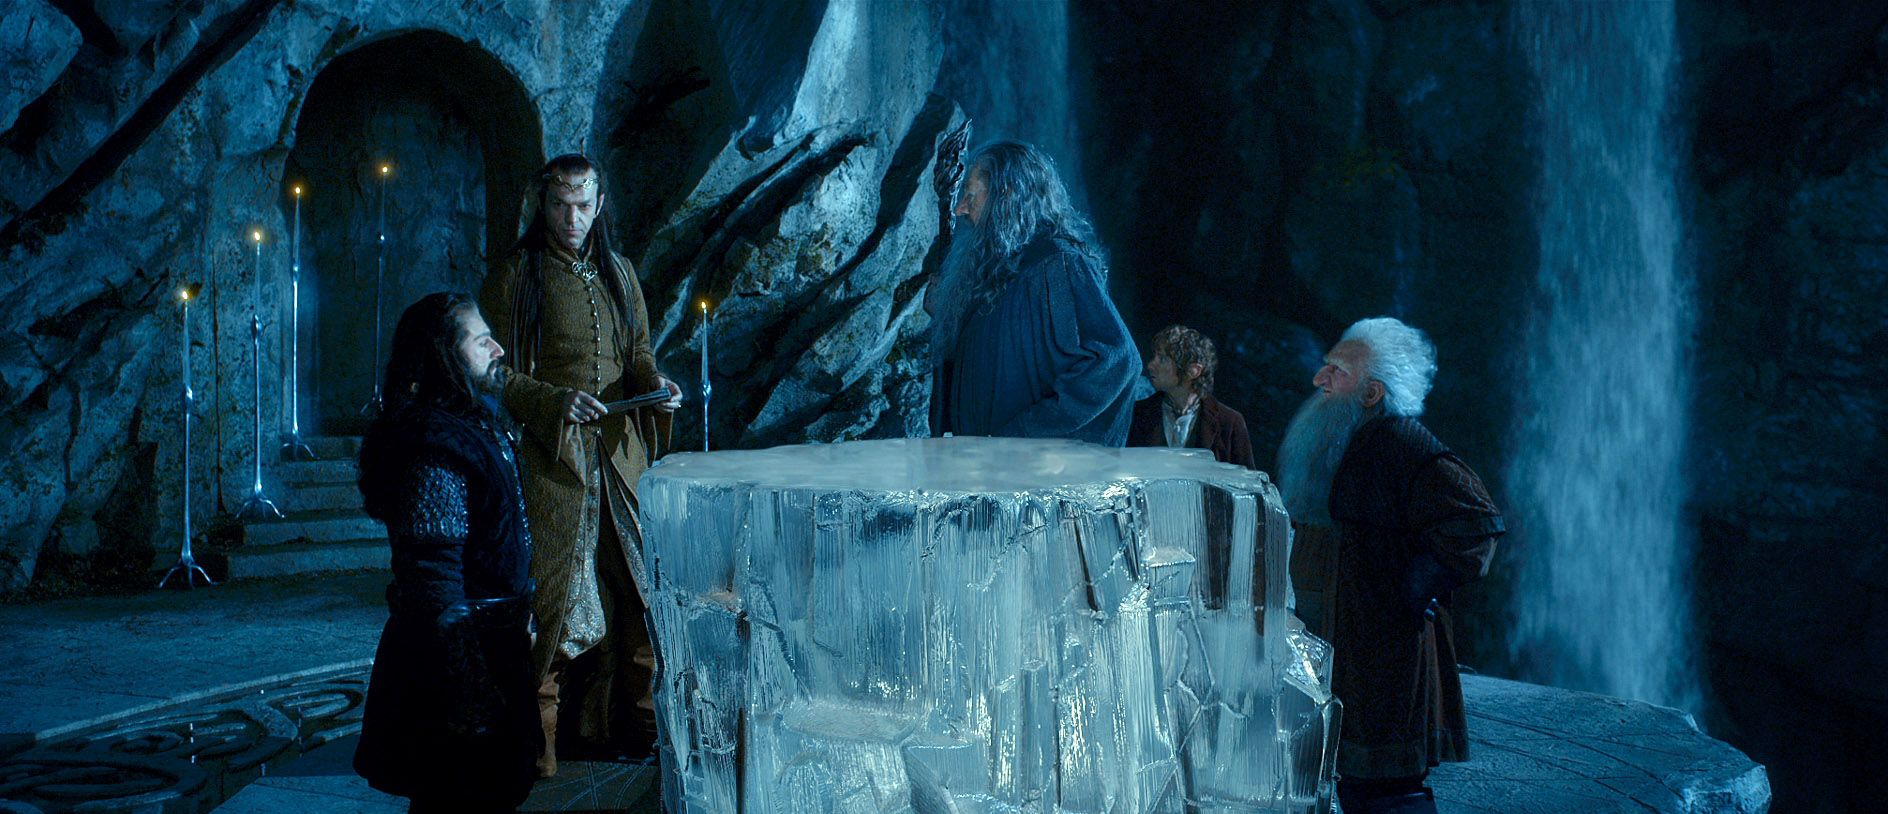 The Hobbit: An Unexpected Journey Photo #3